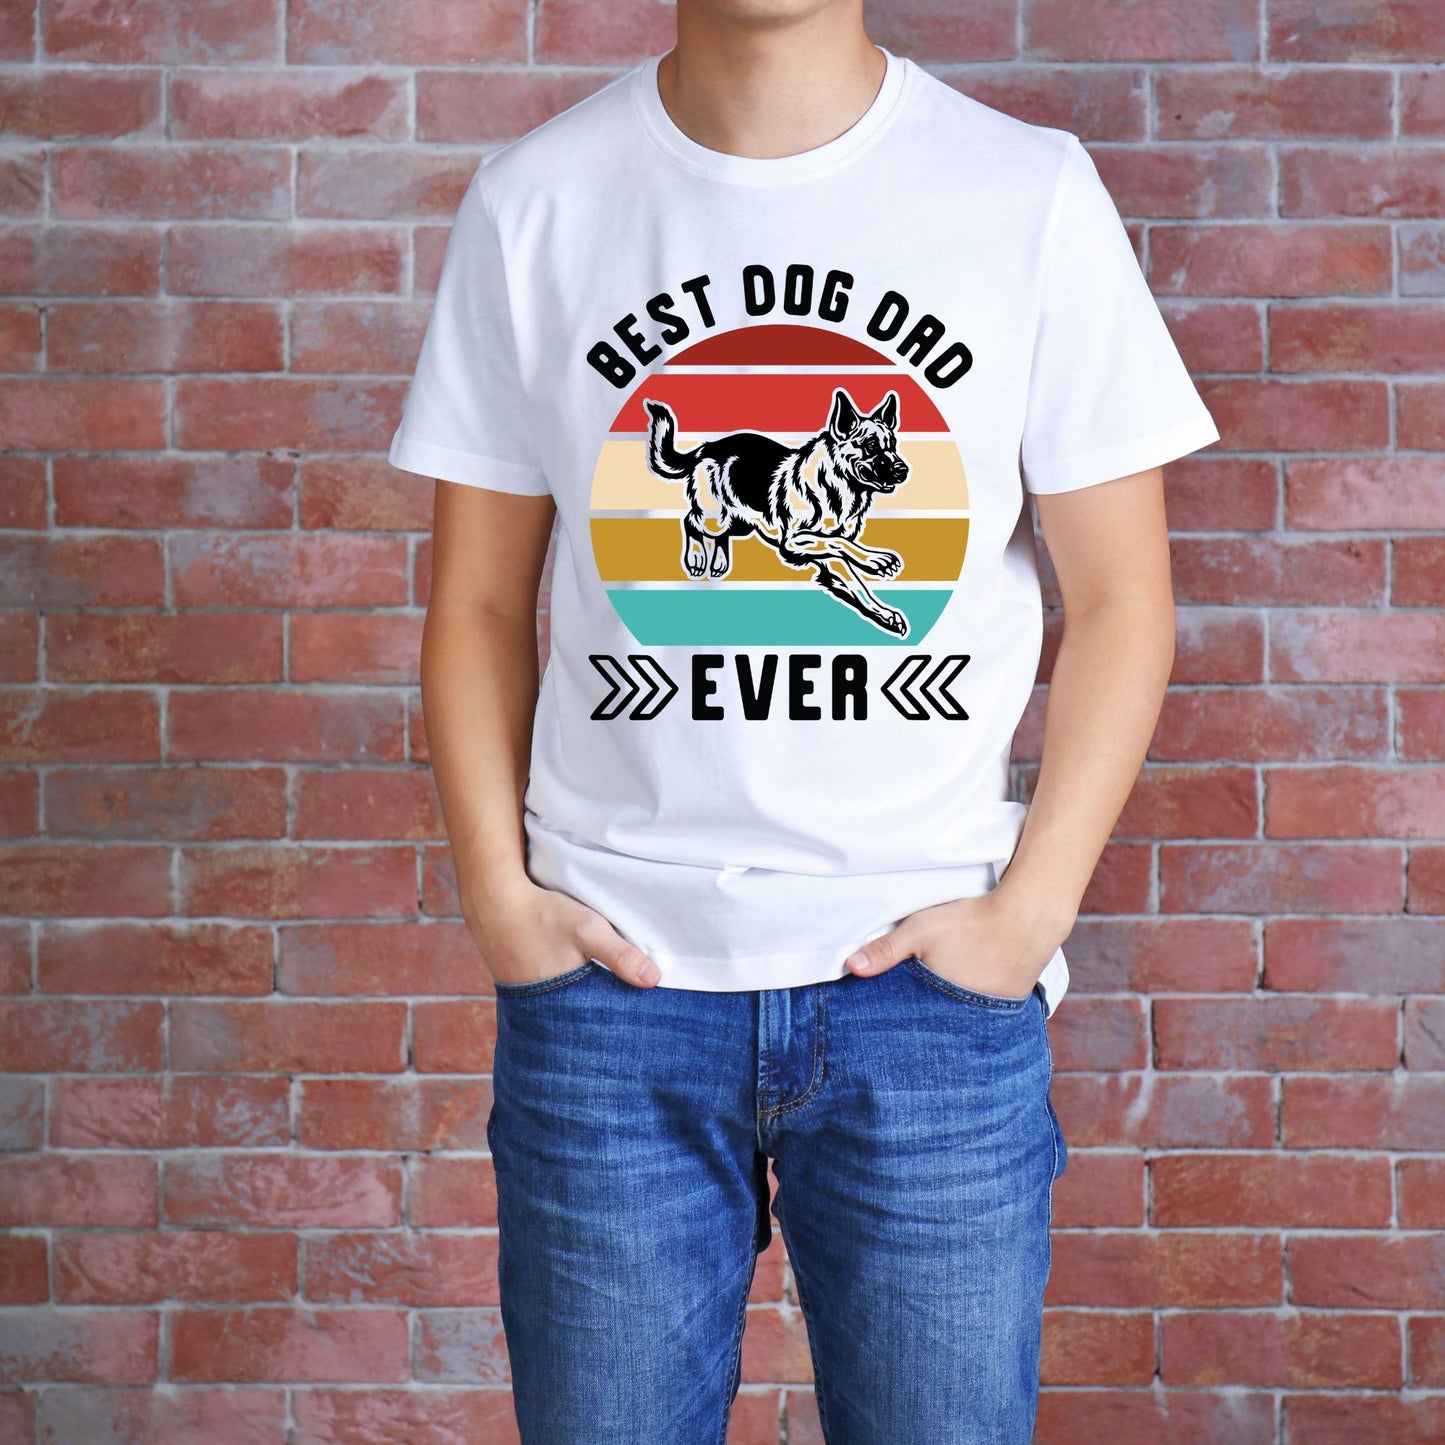 "Best Dog Dad Ever" - Short Sleeved T-Shirt for Father's Day Gift